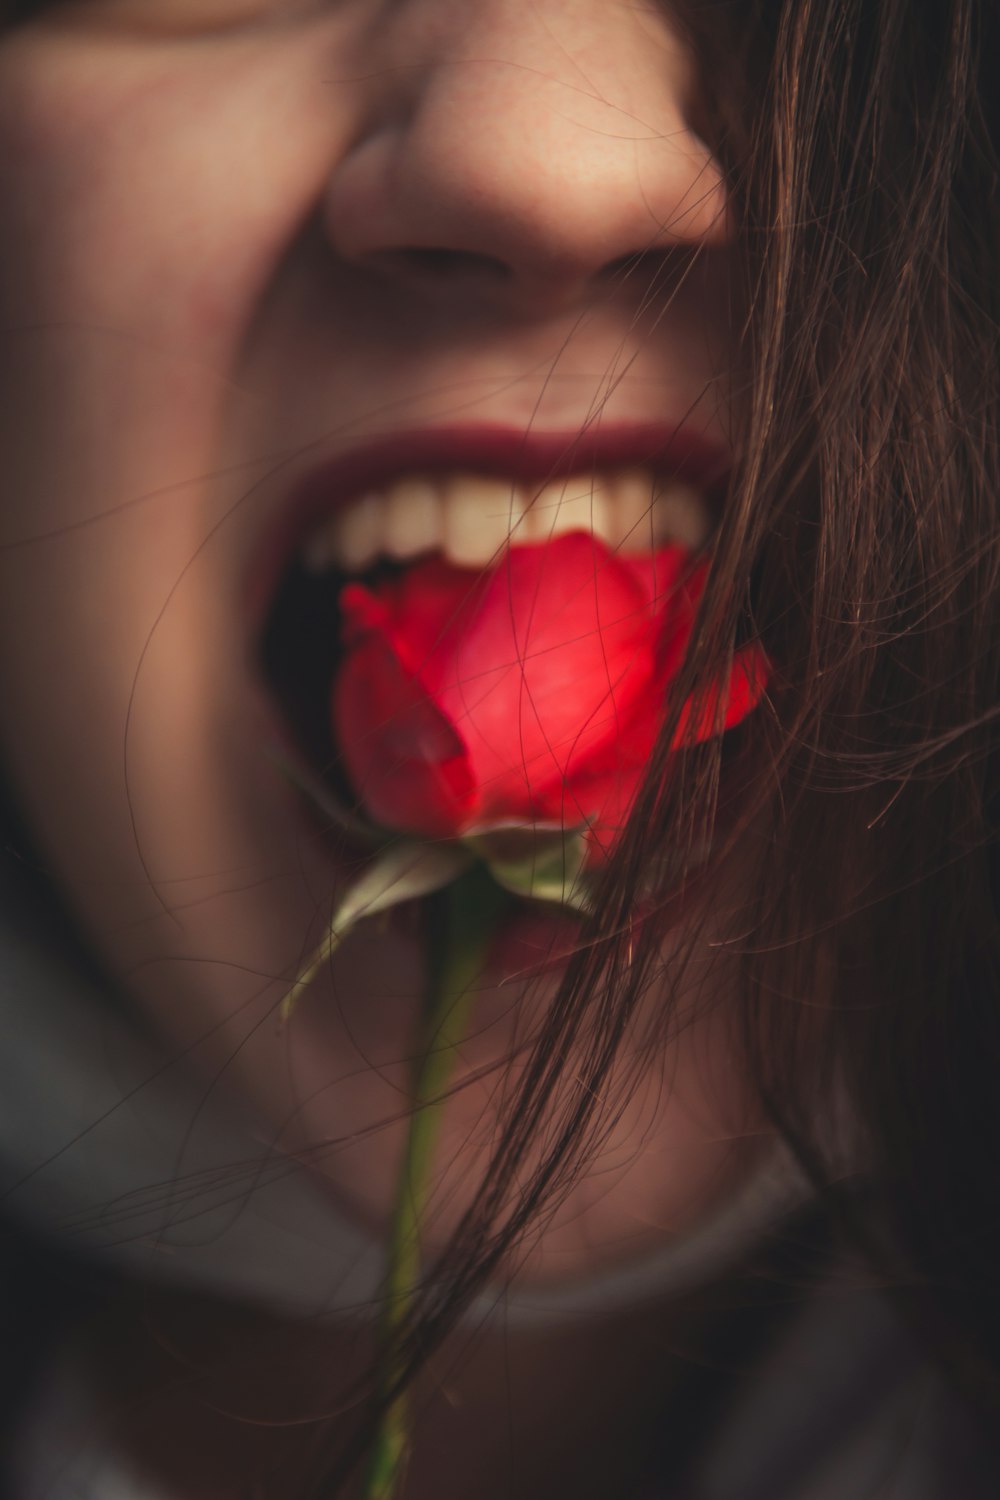 woman puts rose into her mouth